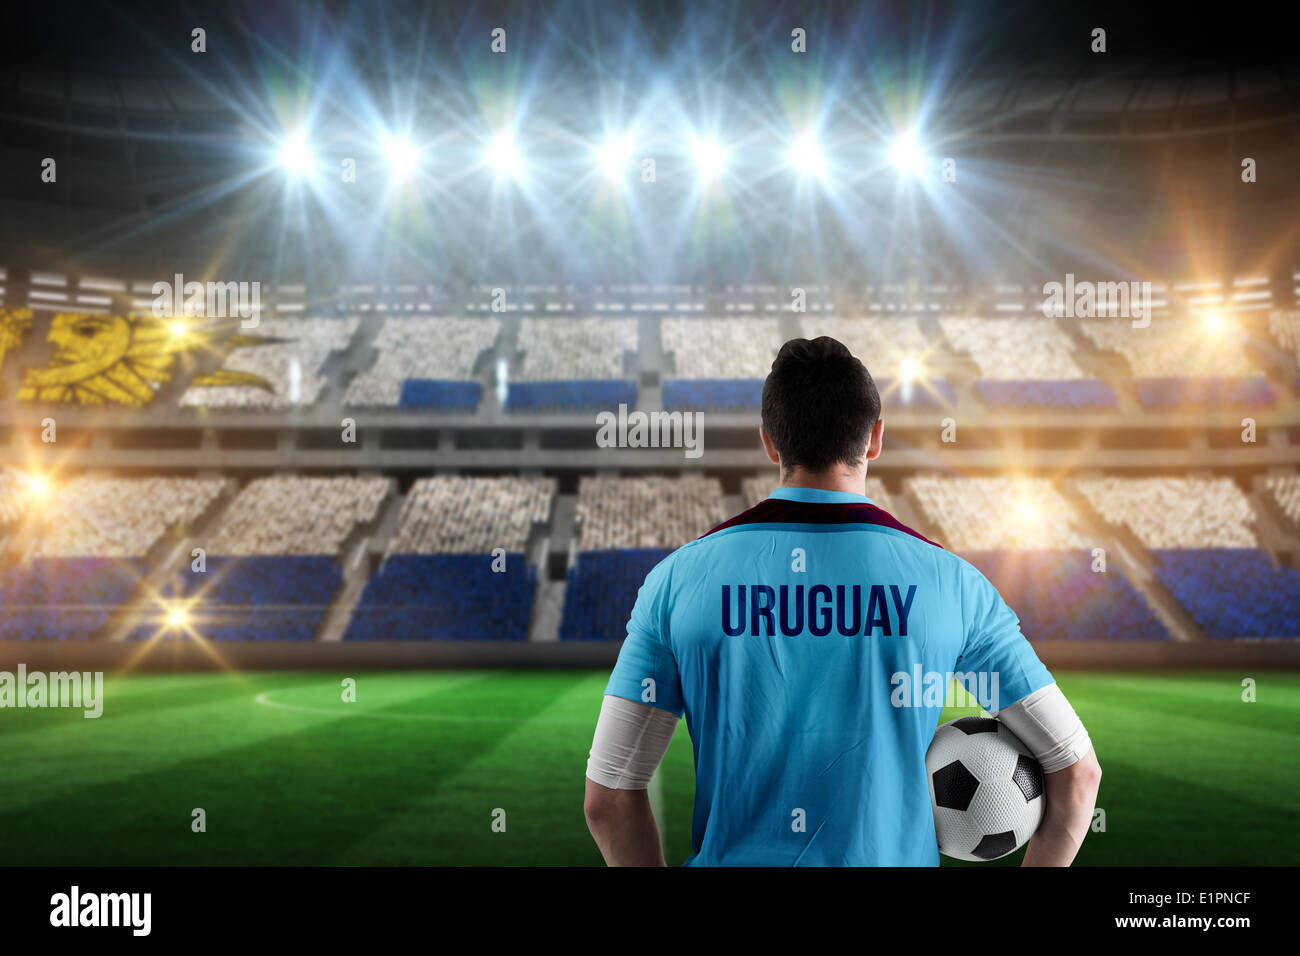 Composite image of uruguay football player holding ball Stock Photo